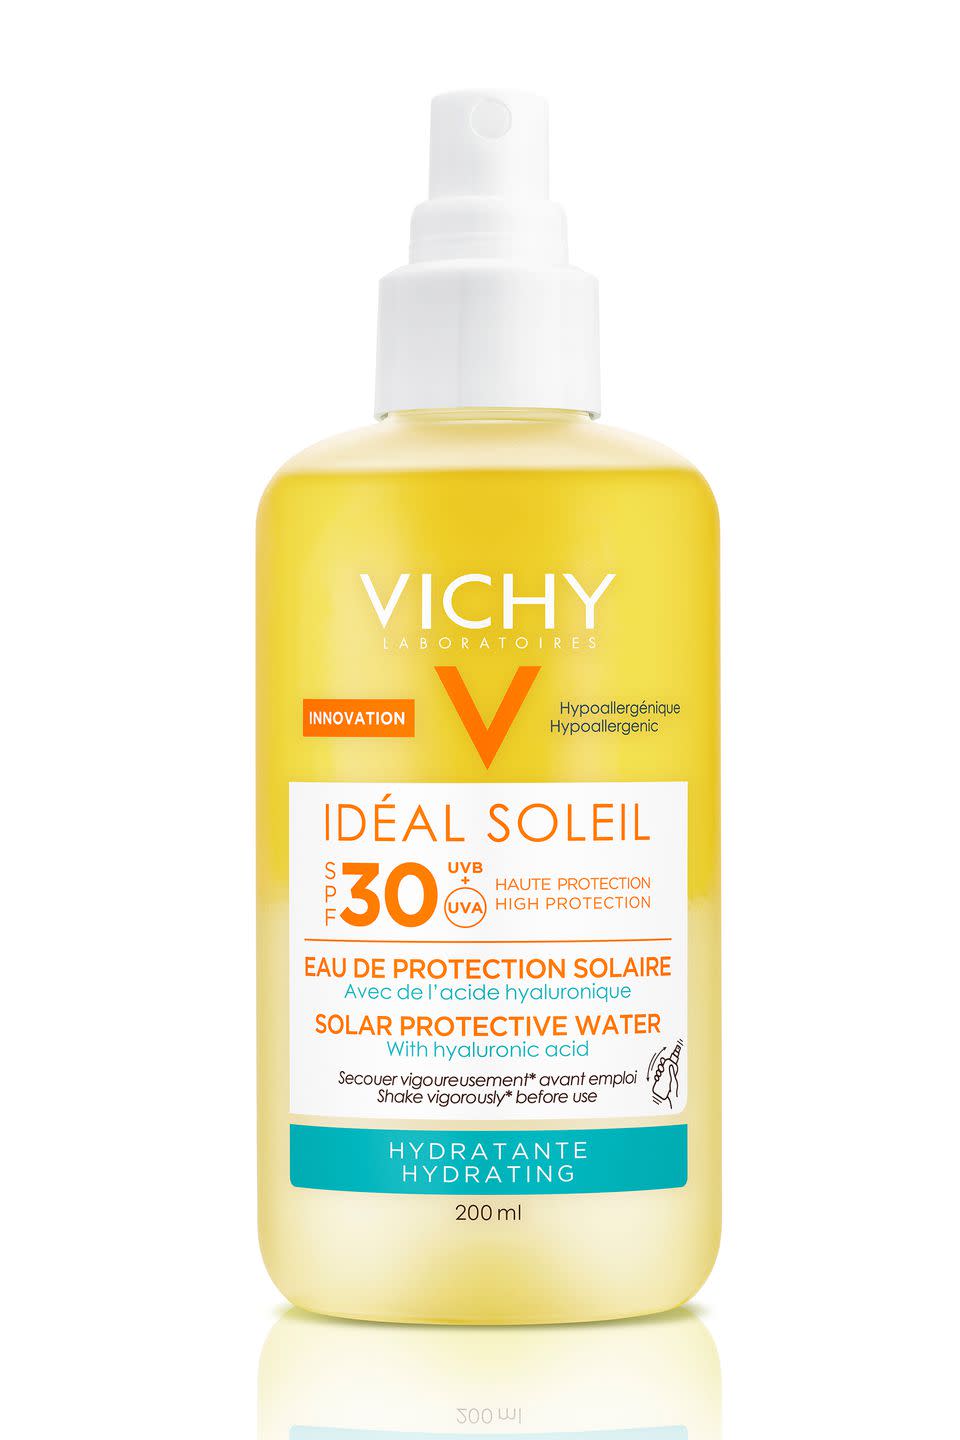 Vichy Idéal Soleil Hydrating SPF30 Protective Solar Water, £19